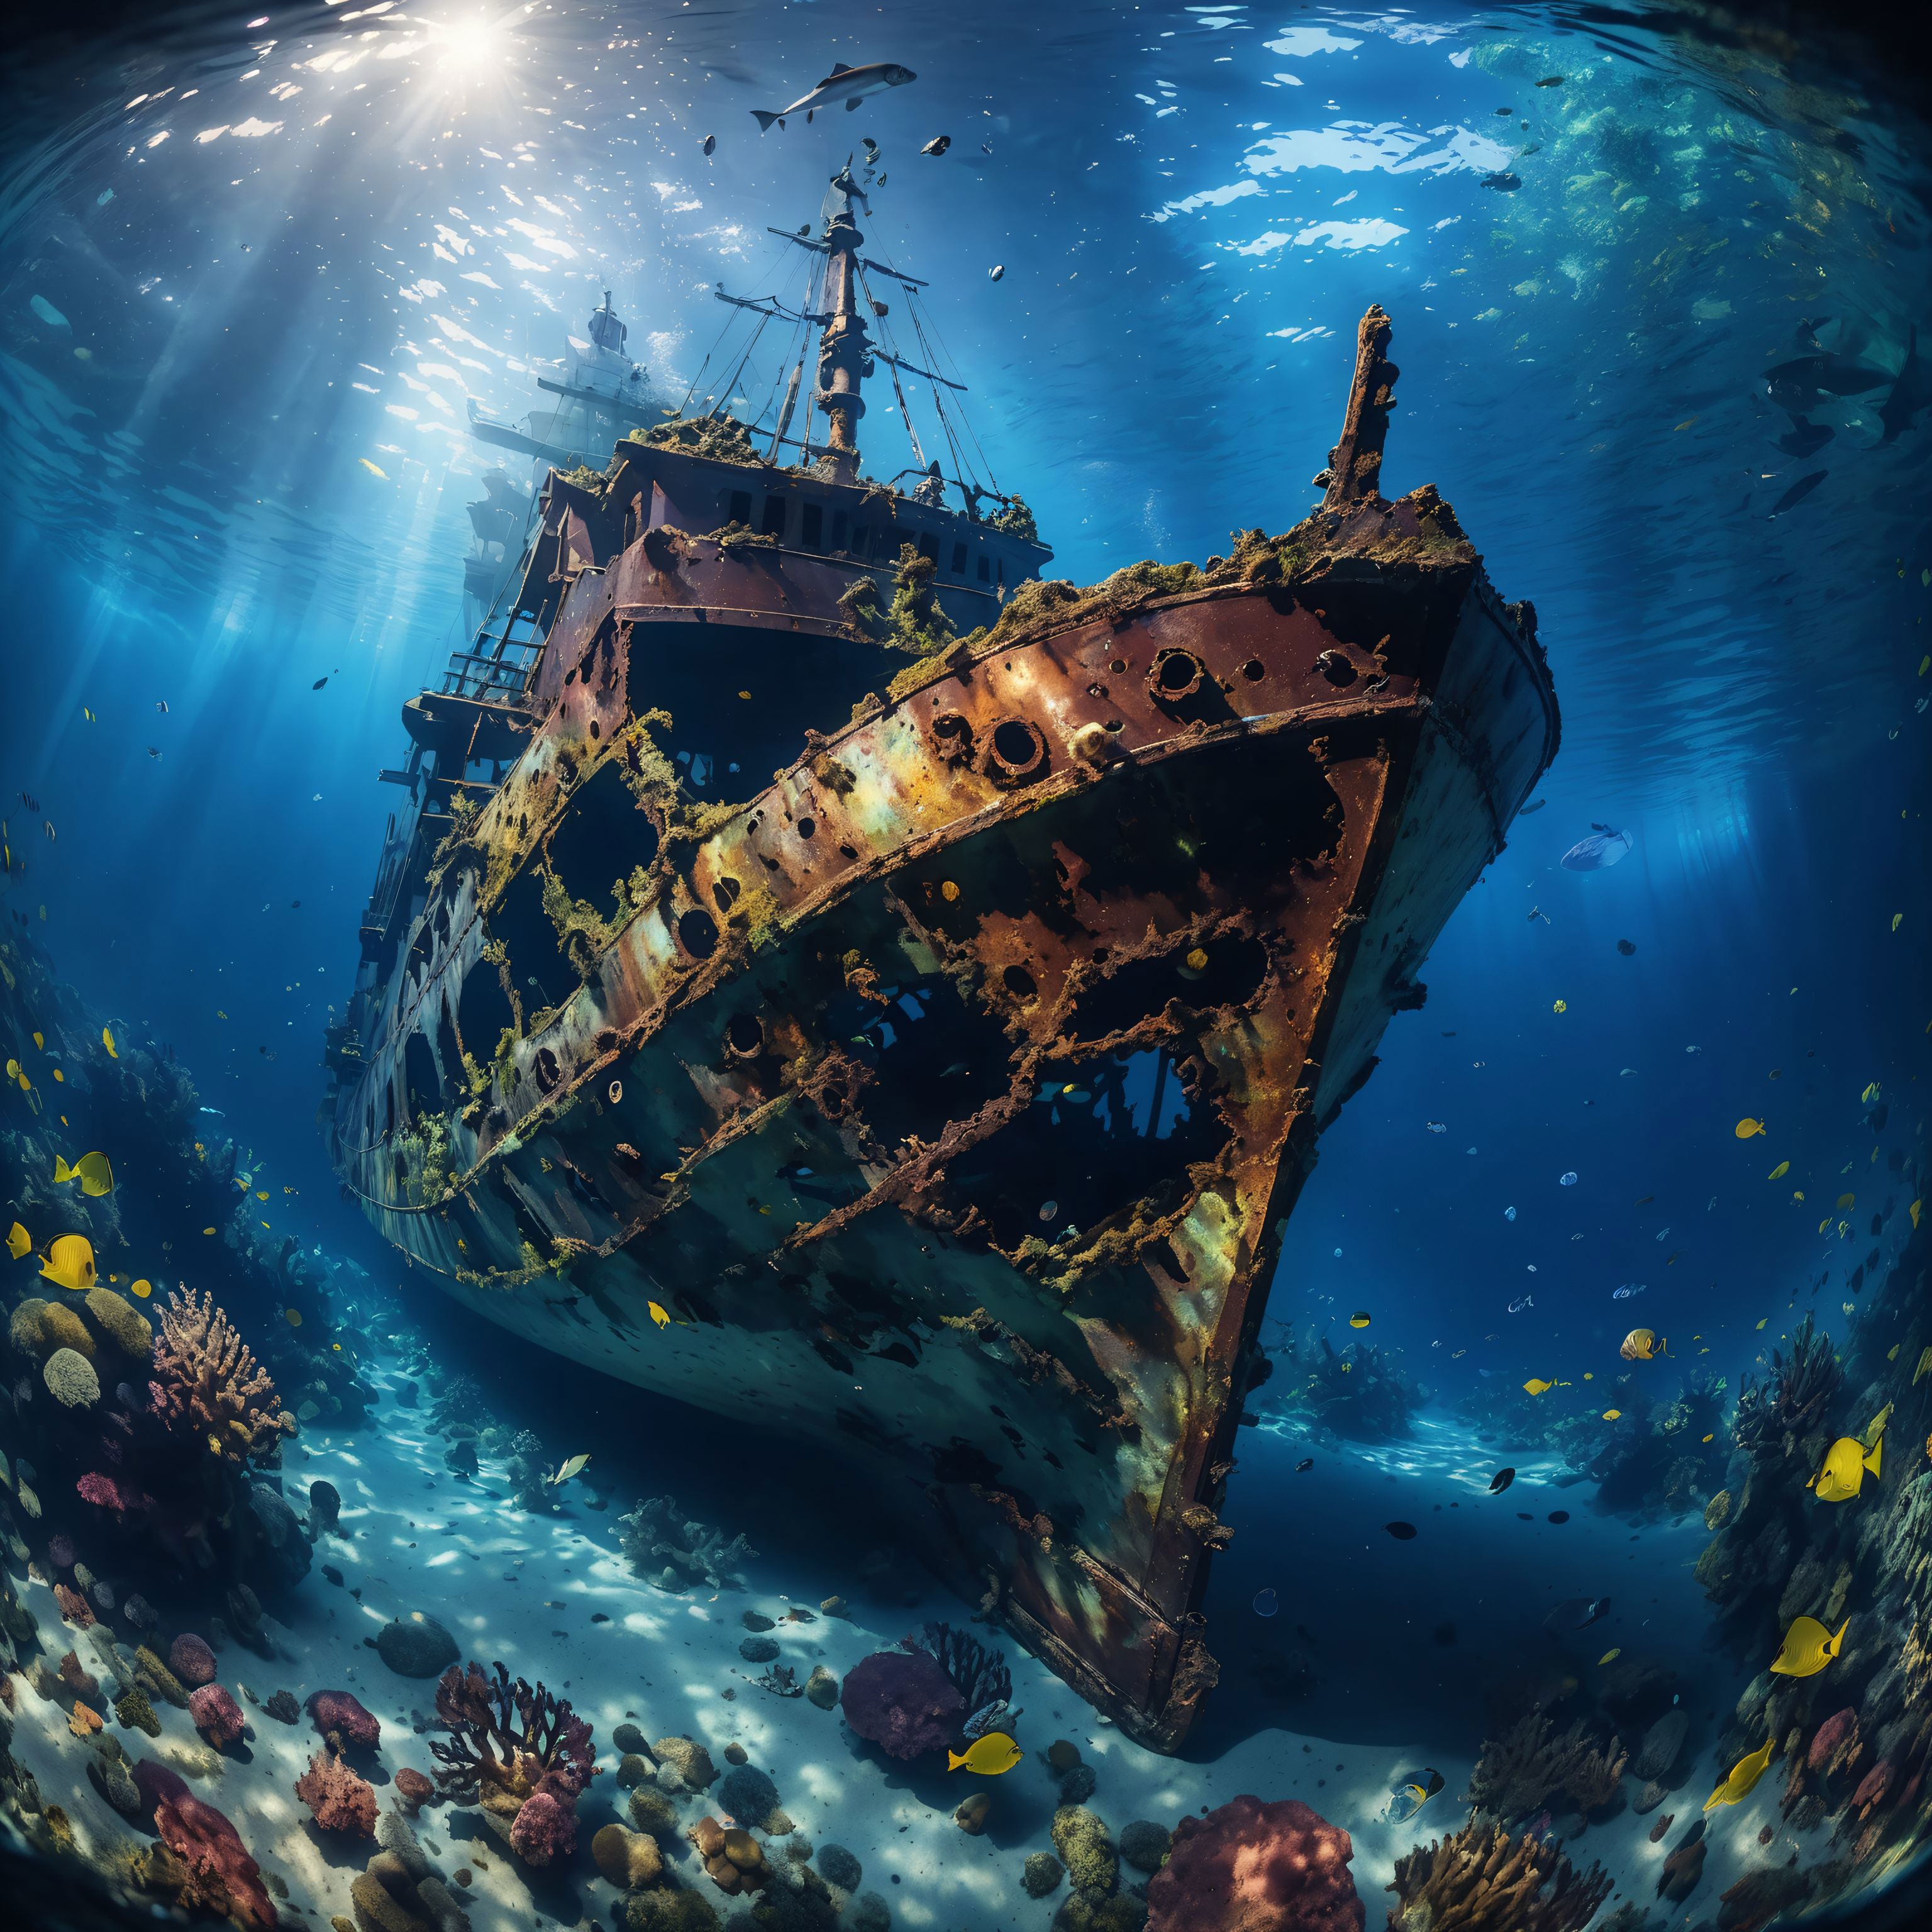 Dilapidated Ship Wreckage Surrounded by Coral and Sea Life